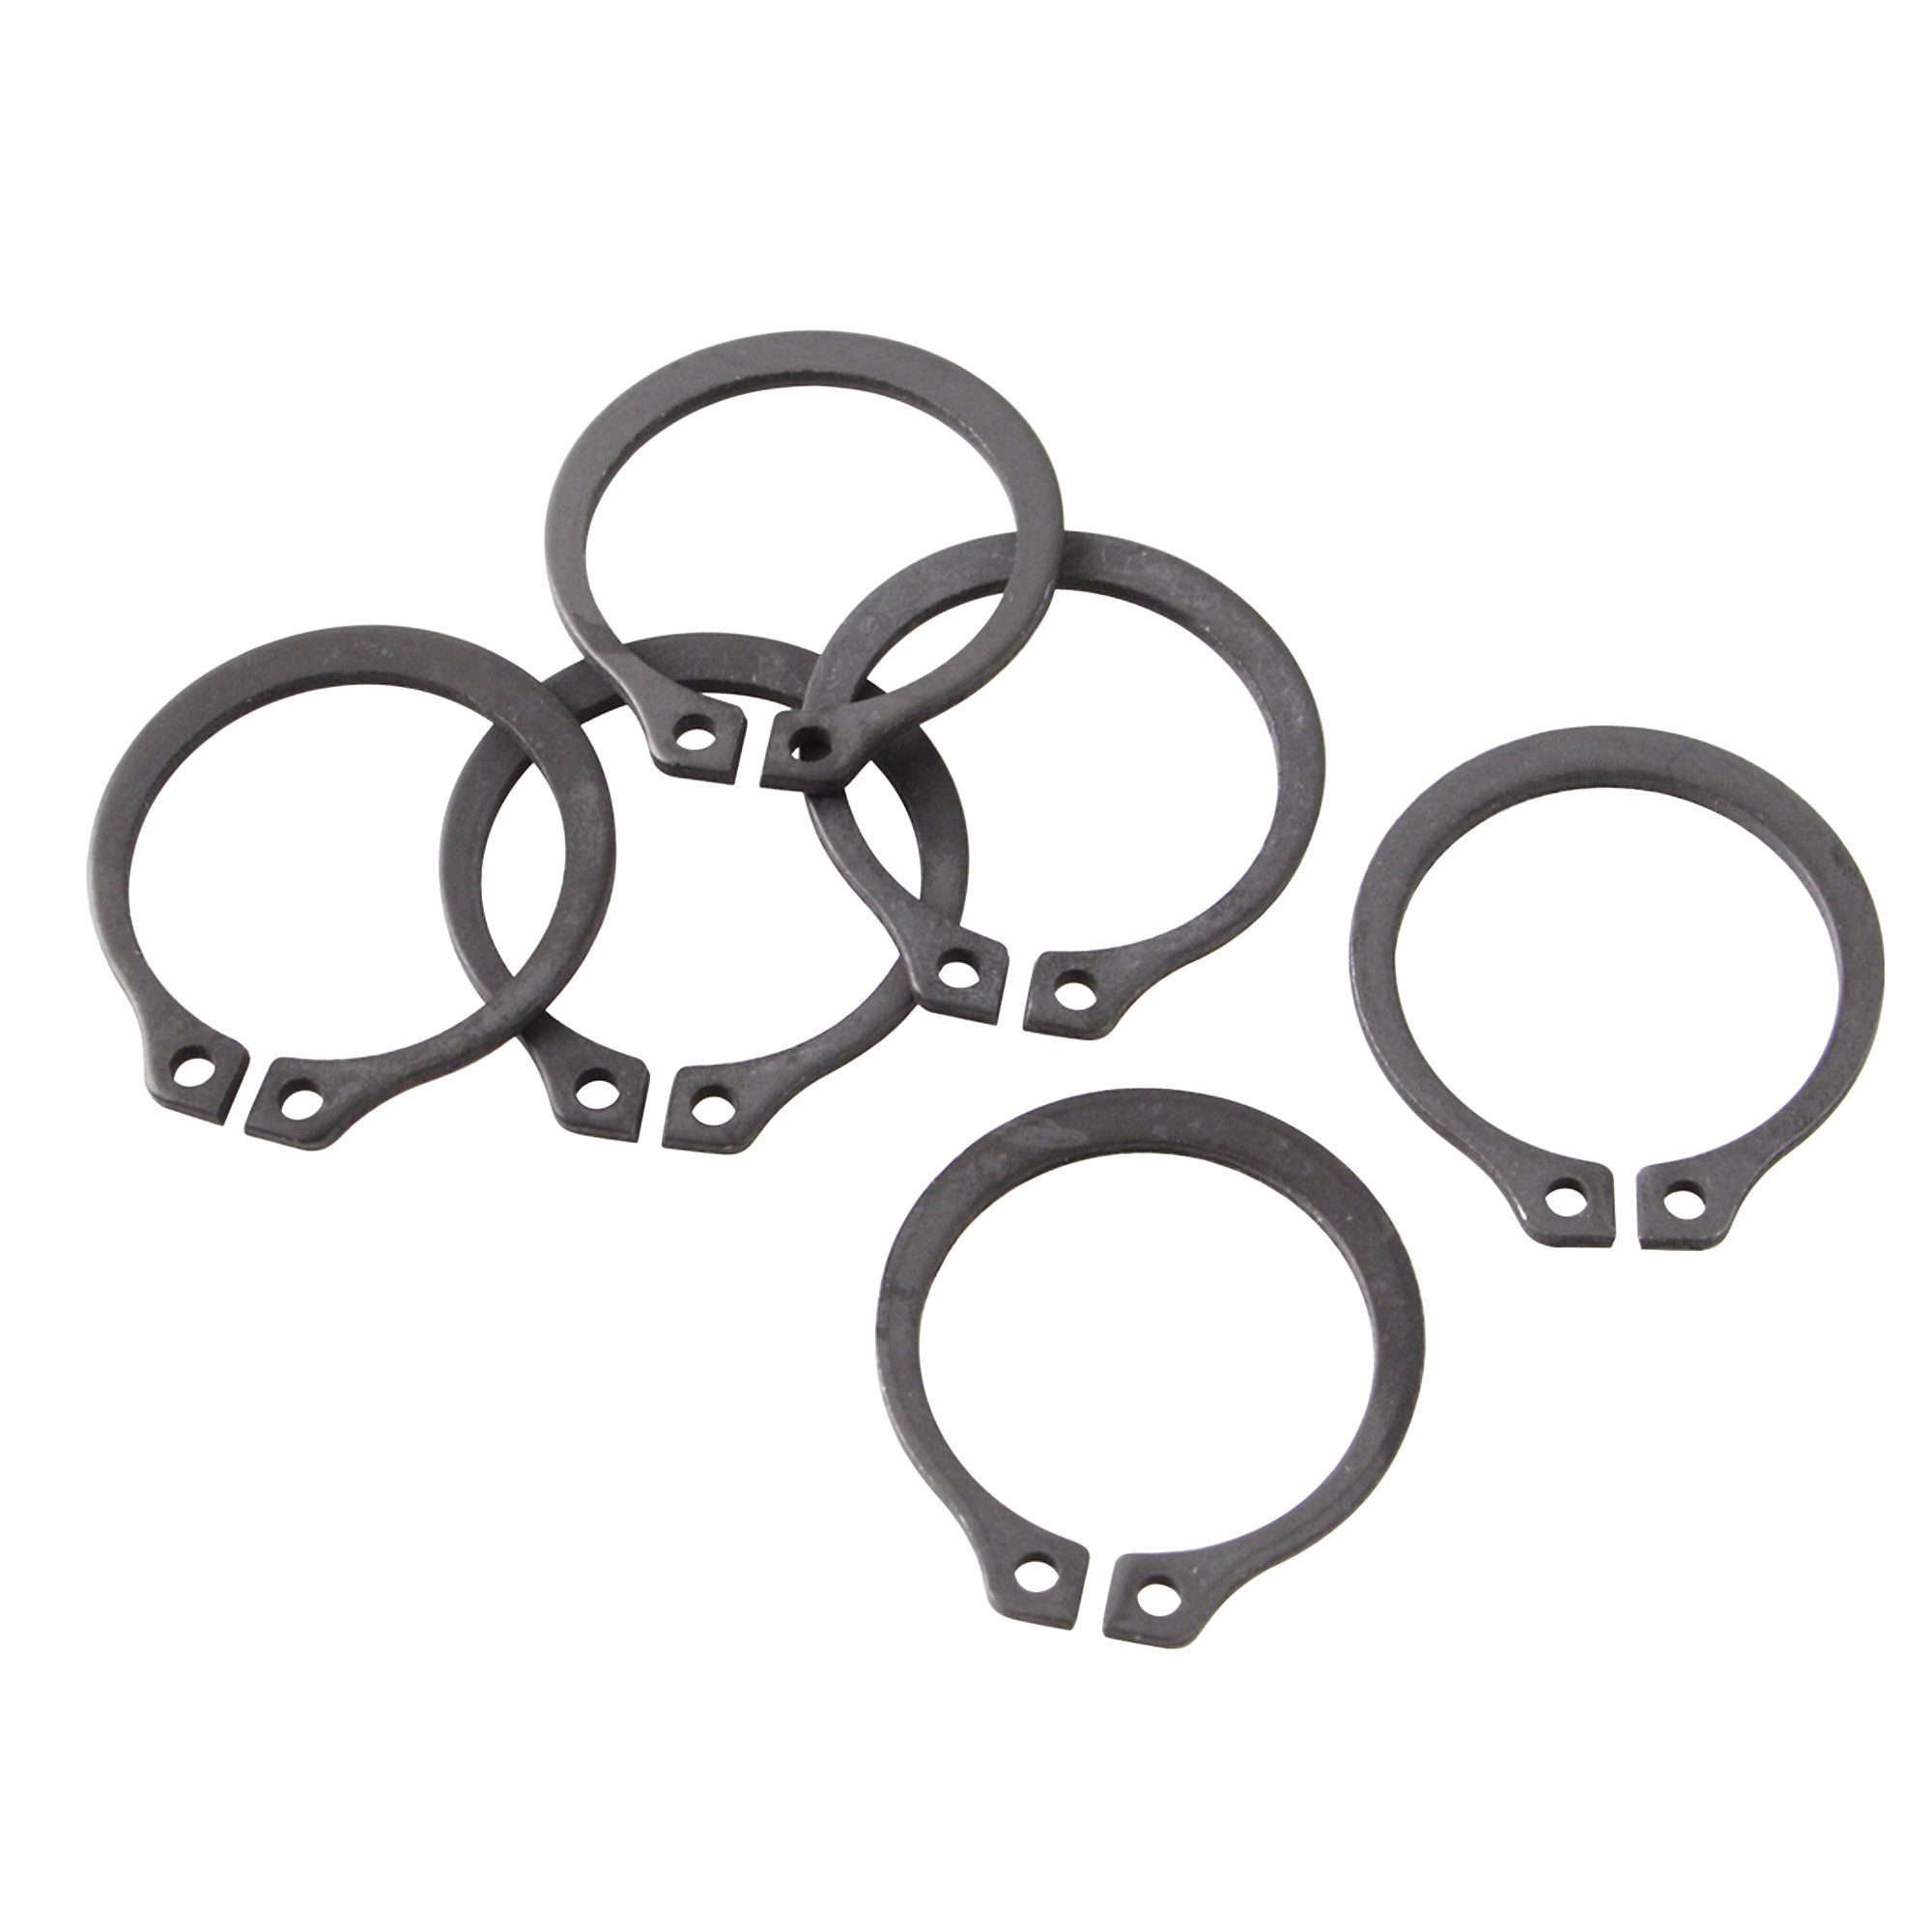 Snap Ring for Pedal Shaft, 6 Pack